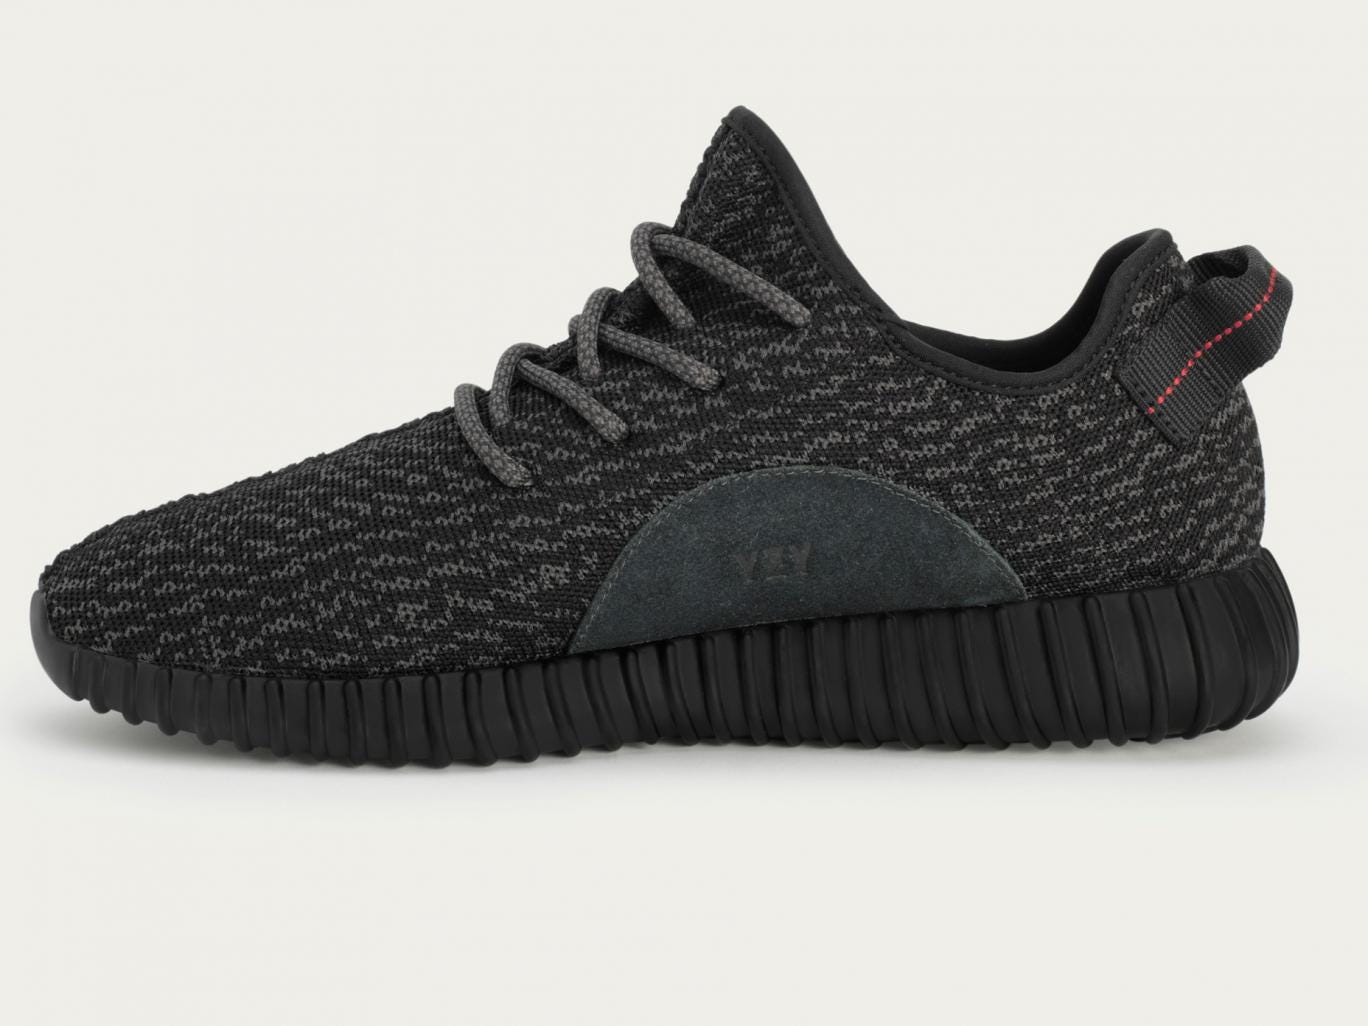 Kanye West&#39;s Yeezy Boost black edition trainers go on sale this week | News | Lifestyle | The ...